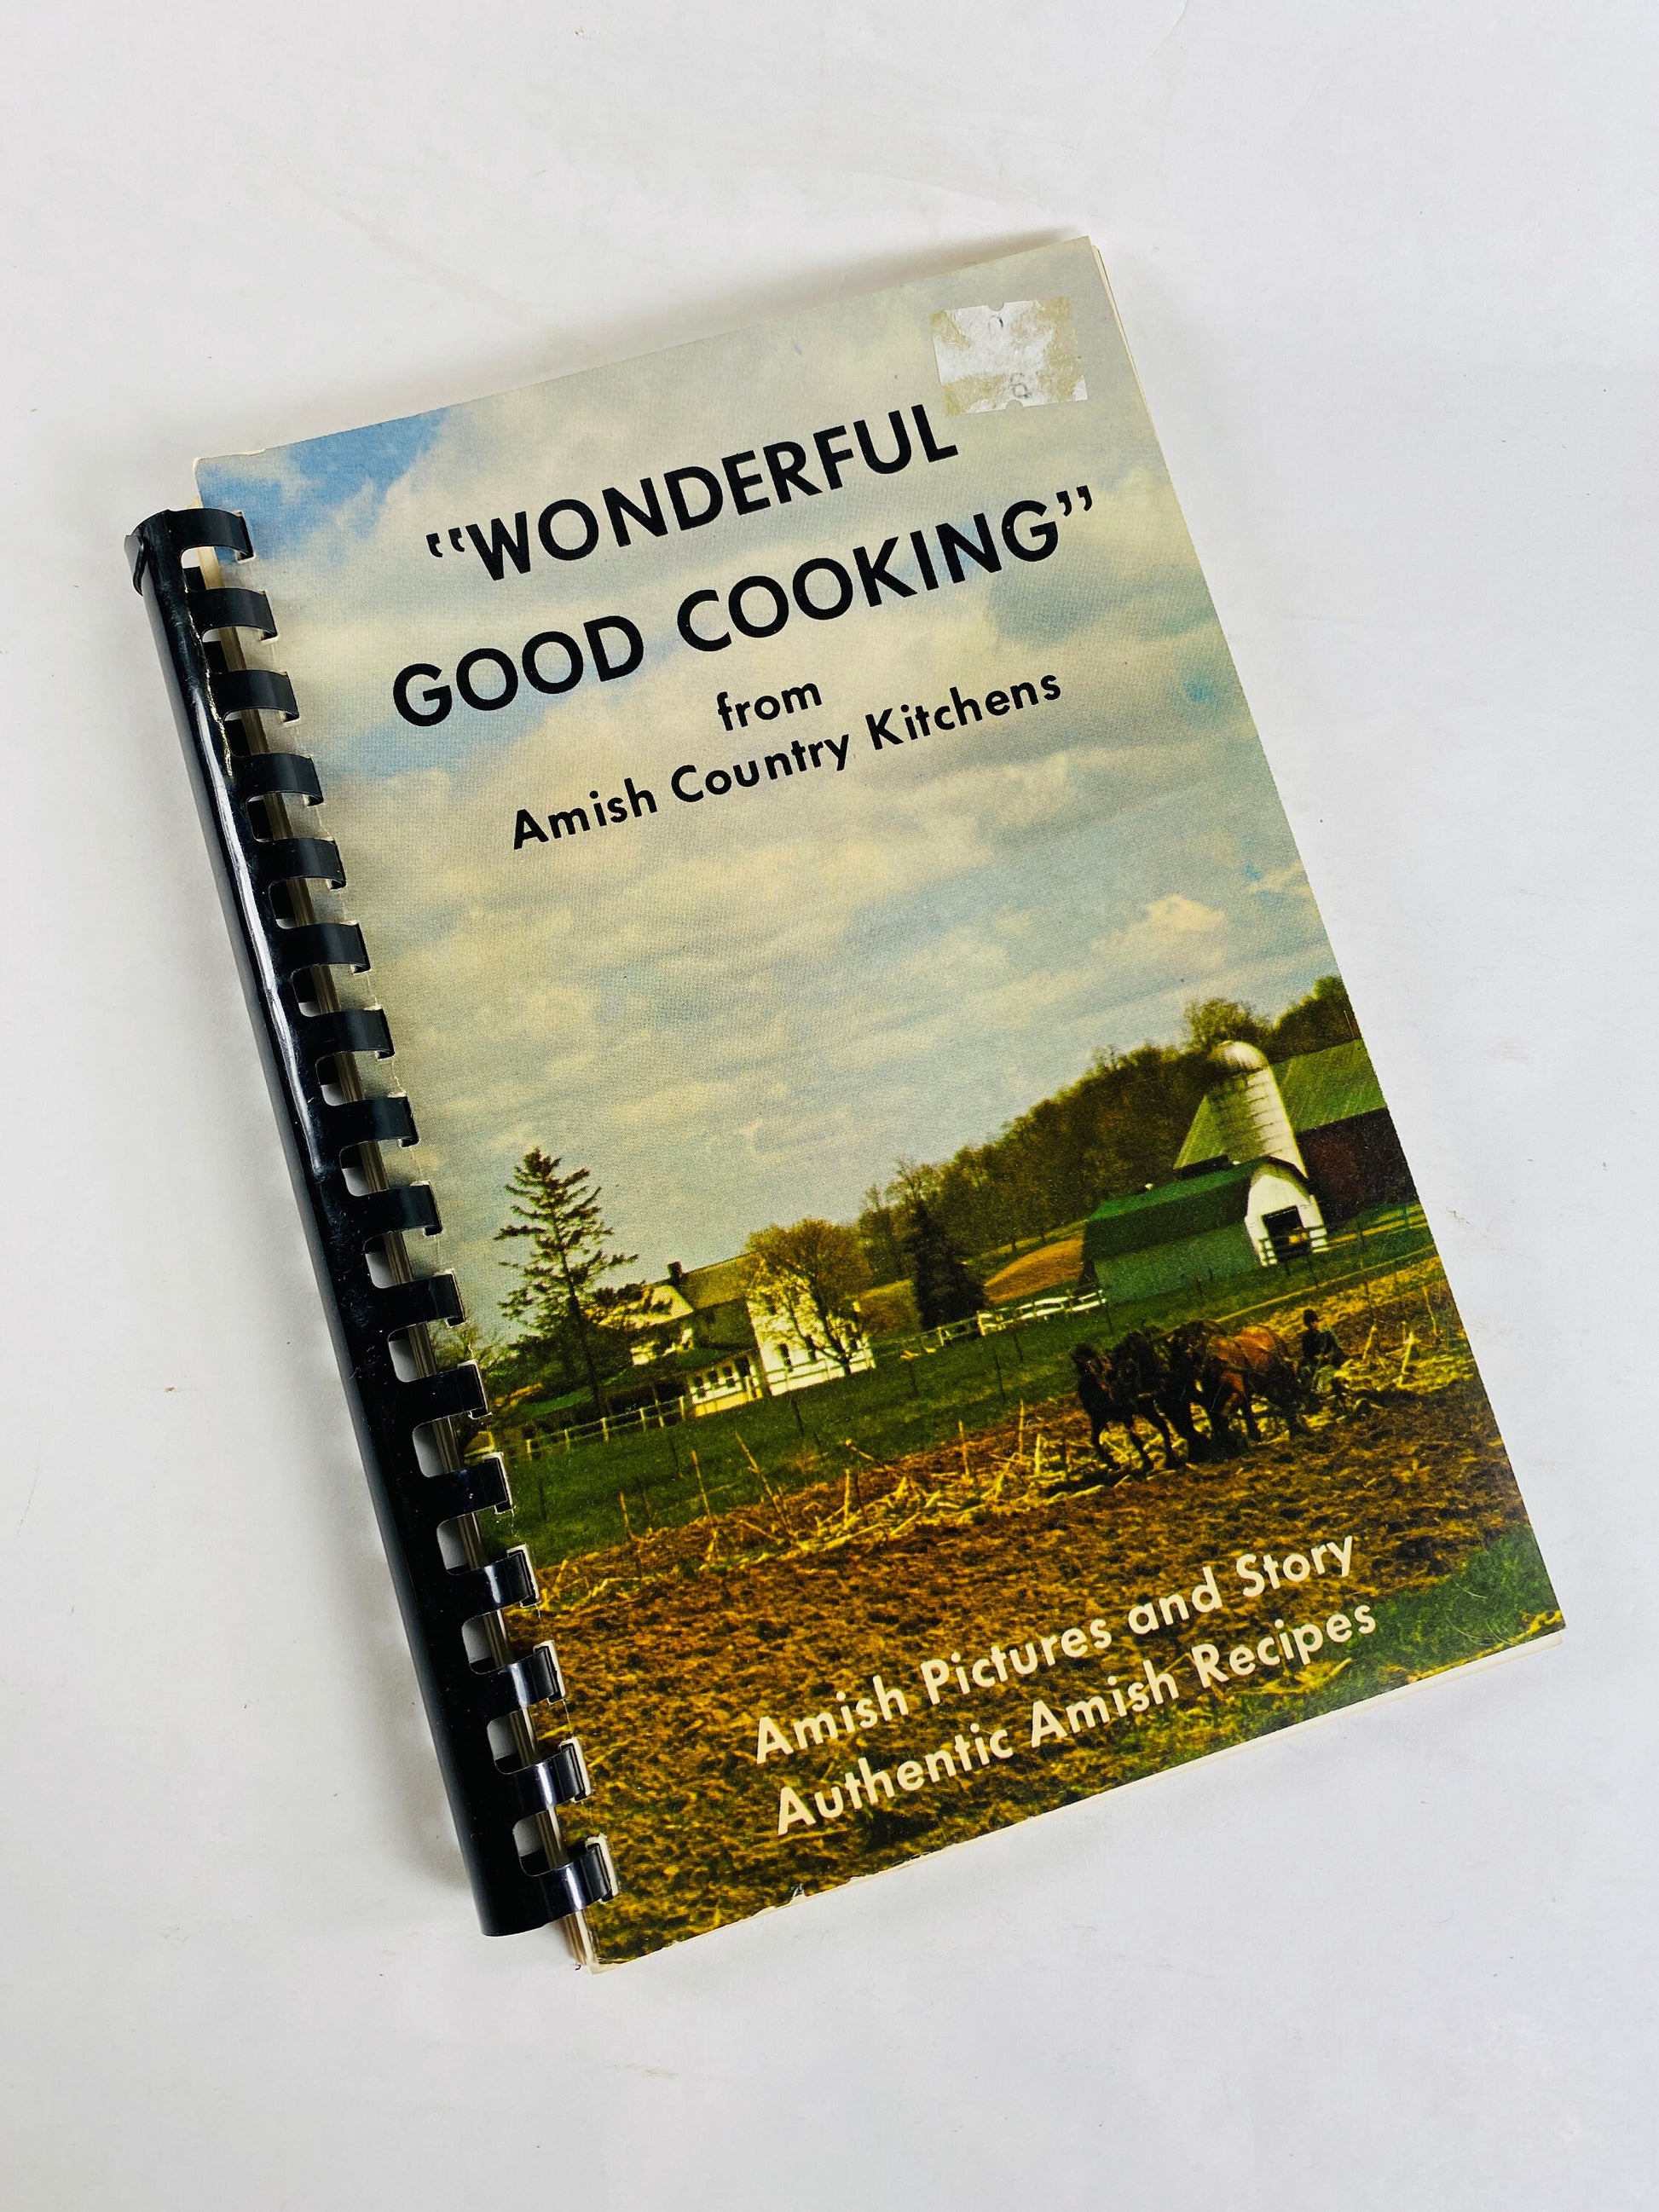 Pennsylvania Dutch Cookbook Wonderful Good Cooking from Amish Country Kitchens vintage cookbook recipes circa 1975 Quaker PA Old Fashioned